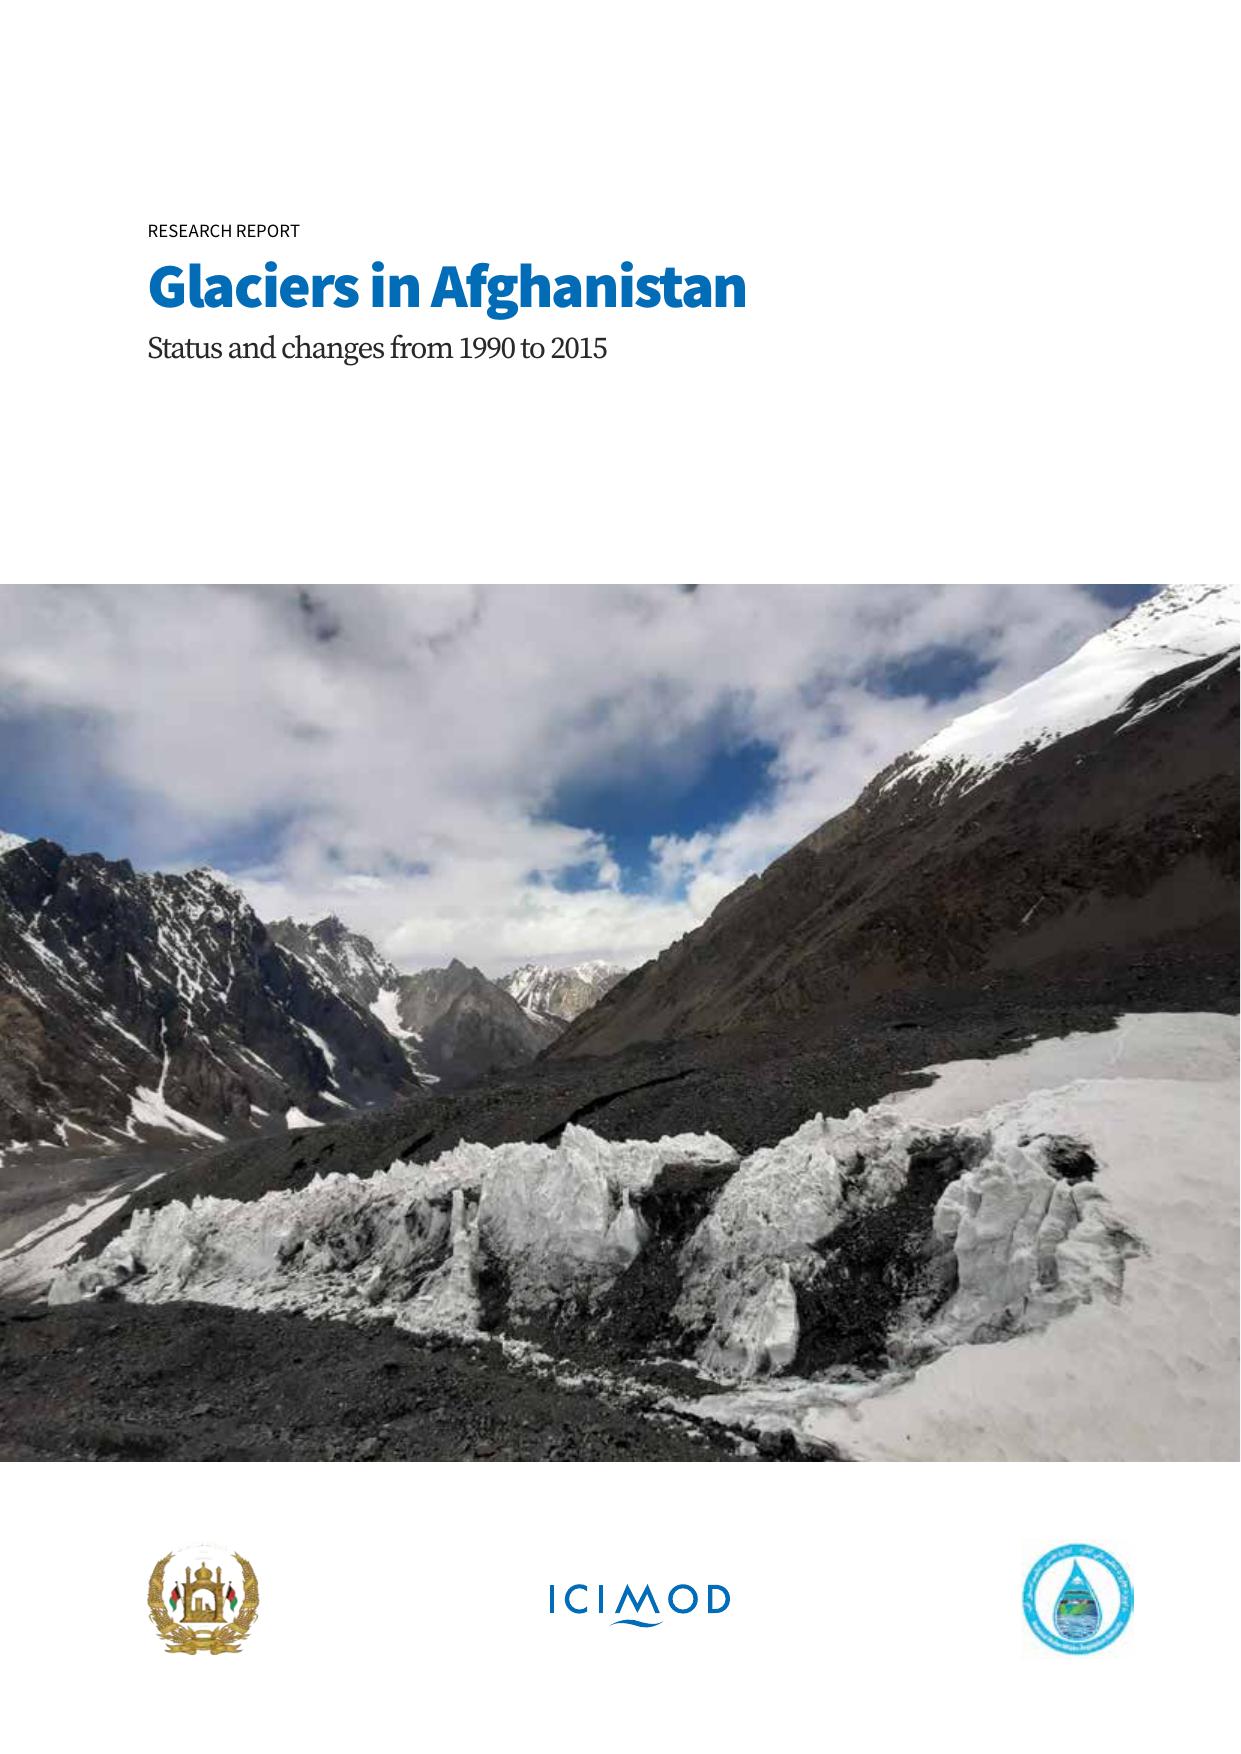 Glaciers in Afghanistan: Status and changes from 1990 to 2015